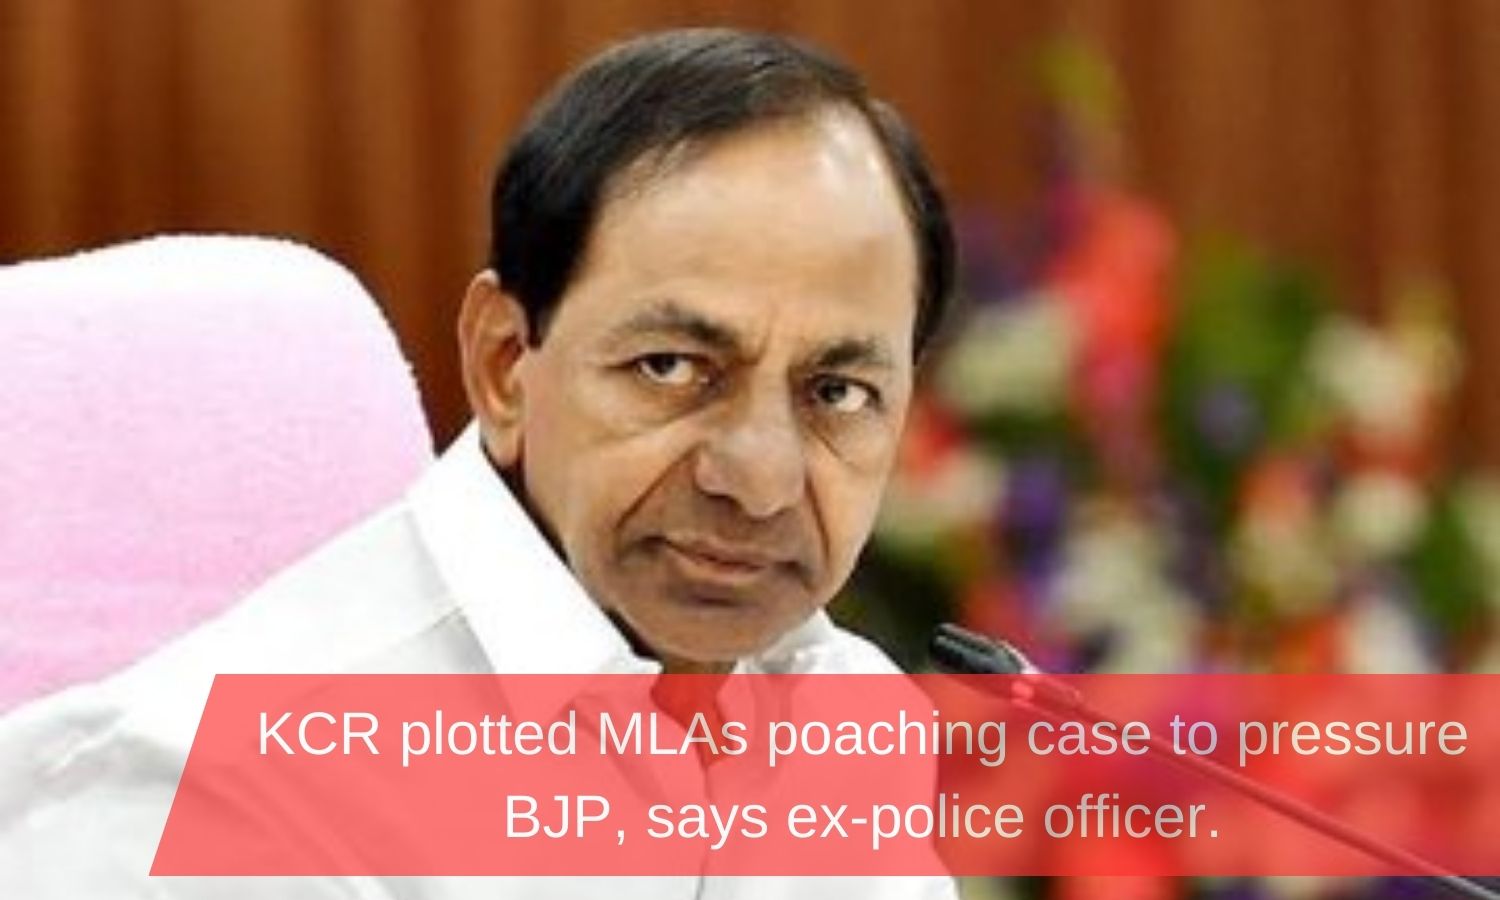 Kcr Used Mlas Poaching Case To Compromise Bjp